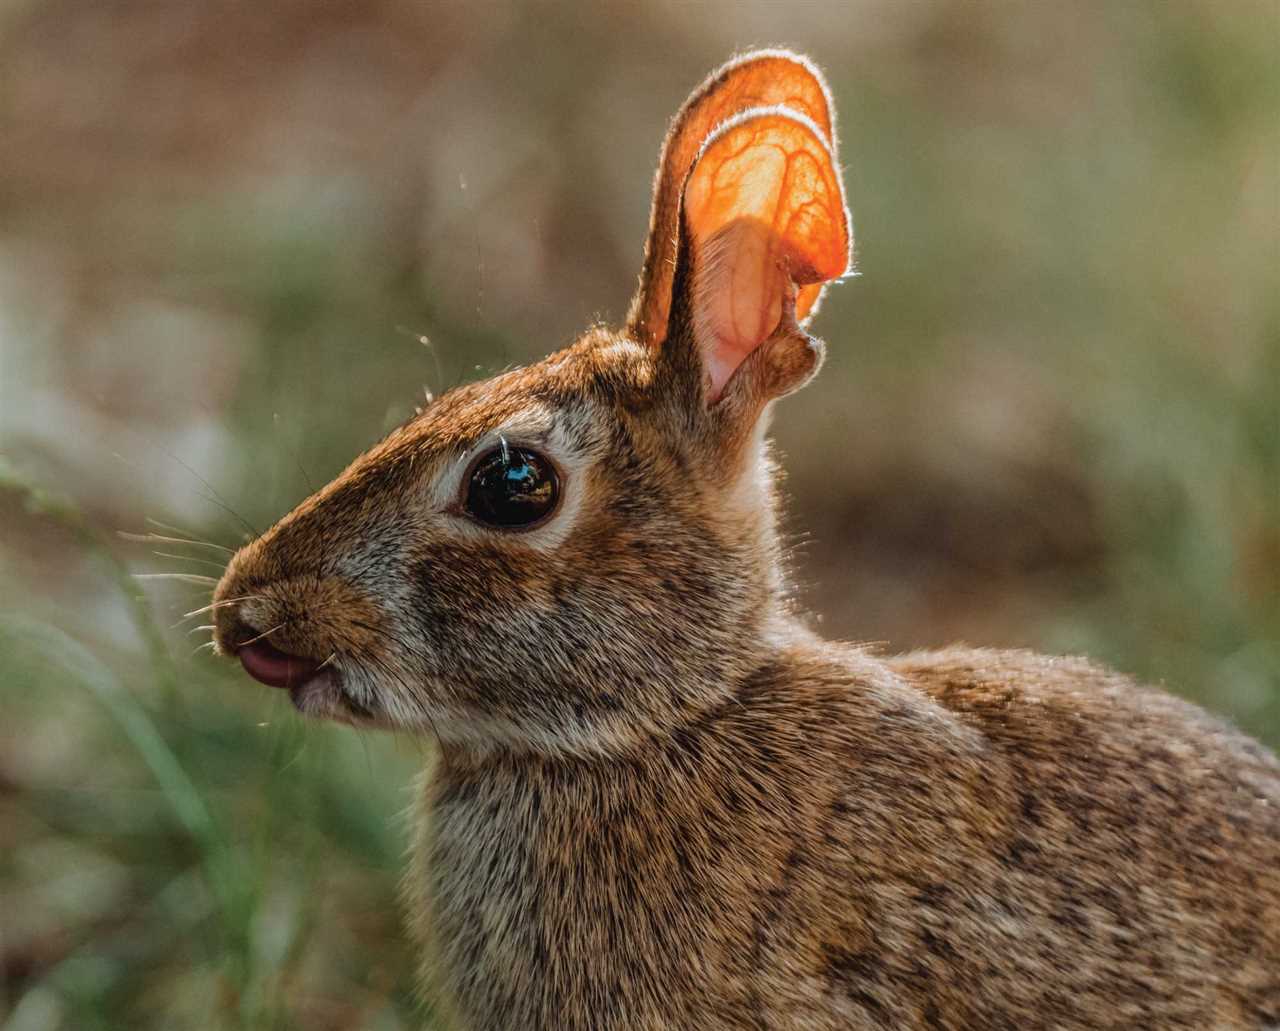 Techniques for Jack Rabbit Hunting